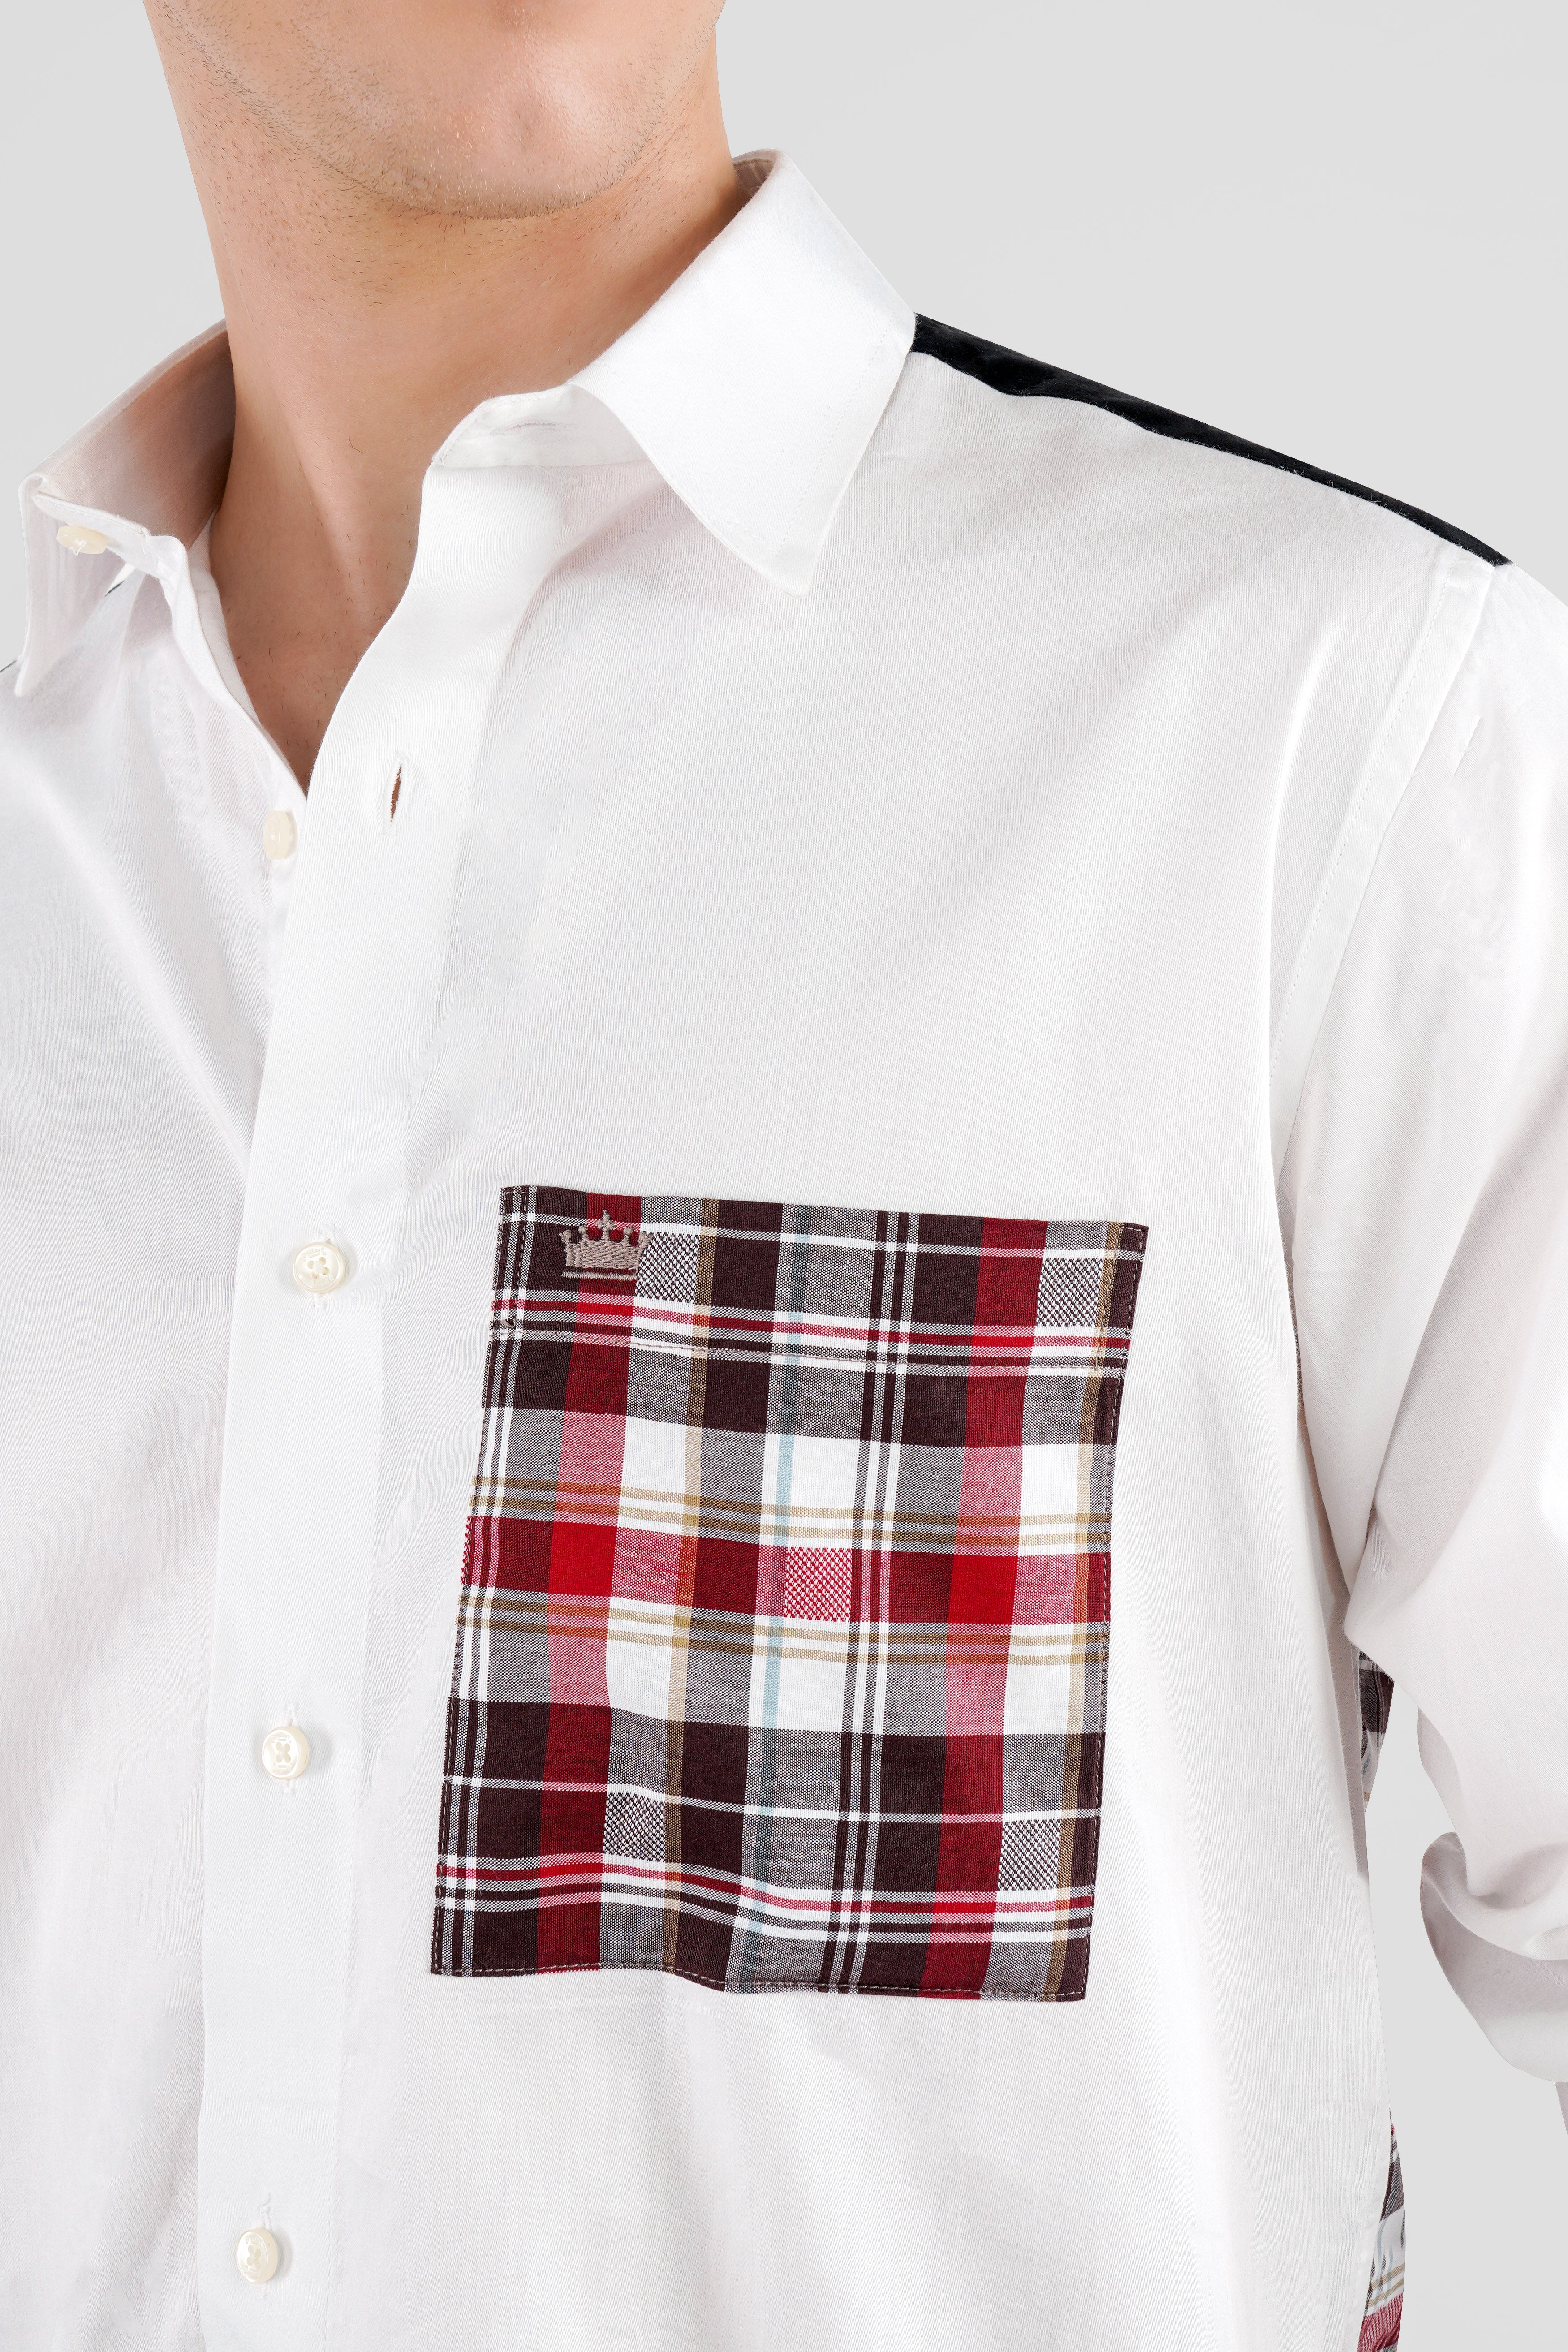 Bright White and Persian Plum Red Checkered with Funky Printed Super Soft Premium Cotton Designer Shirt